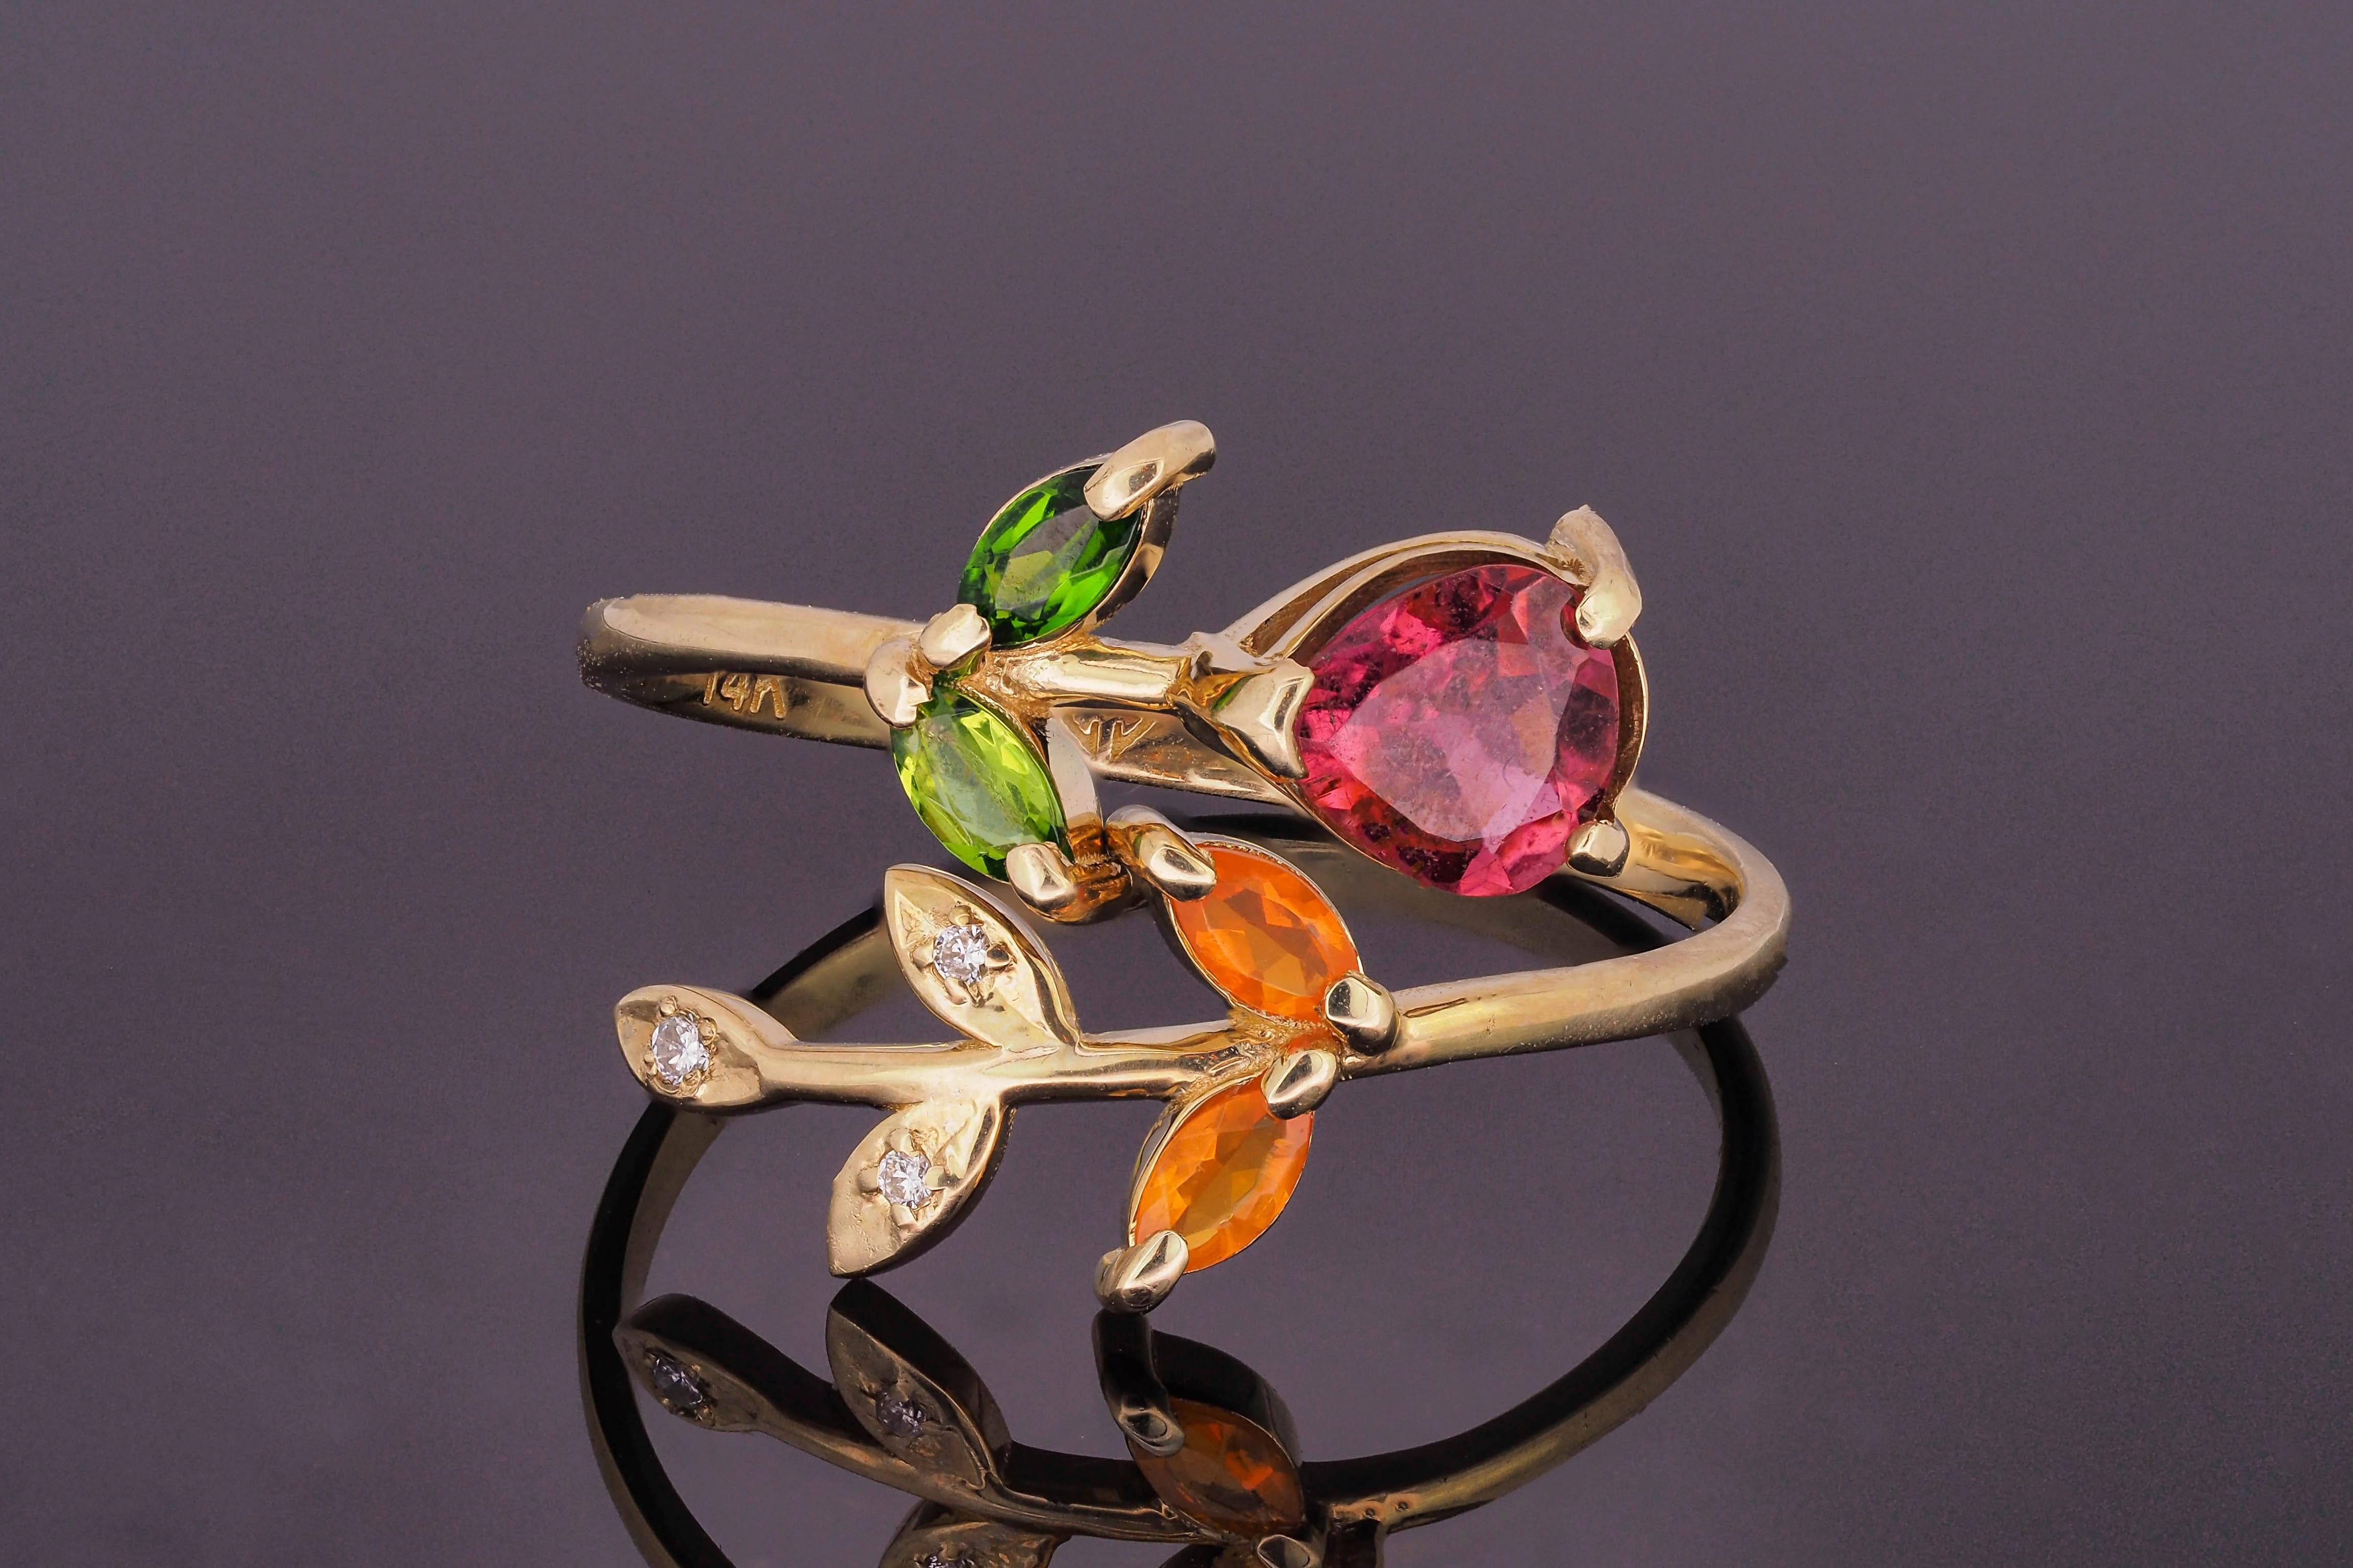 Women's Pink tourmaline ring in 14k gold.  For Sale